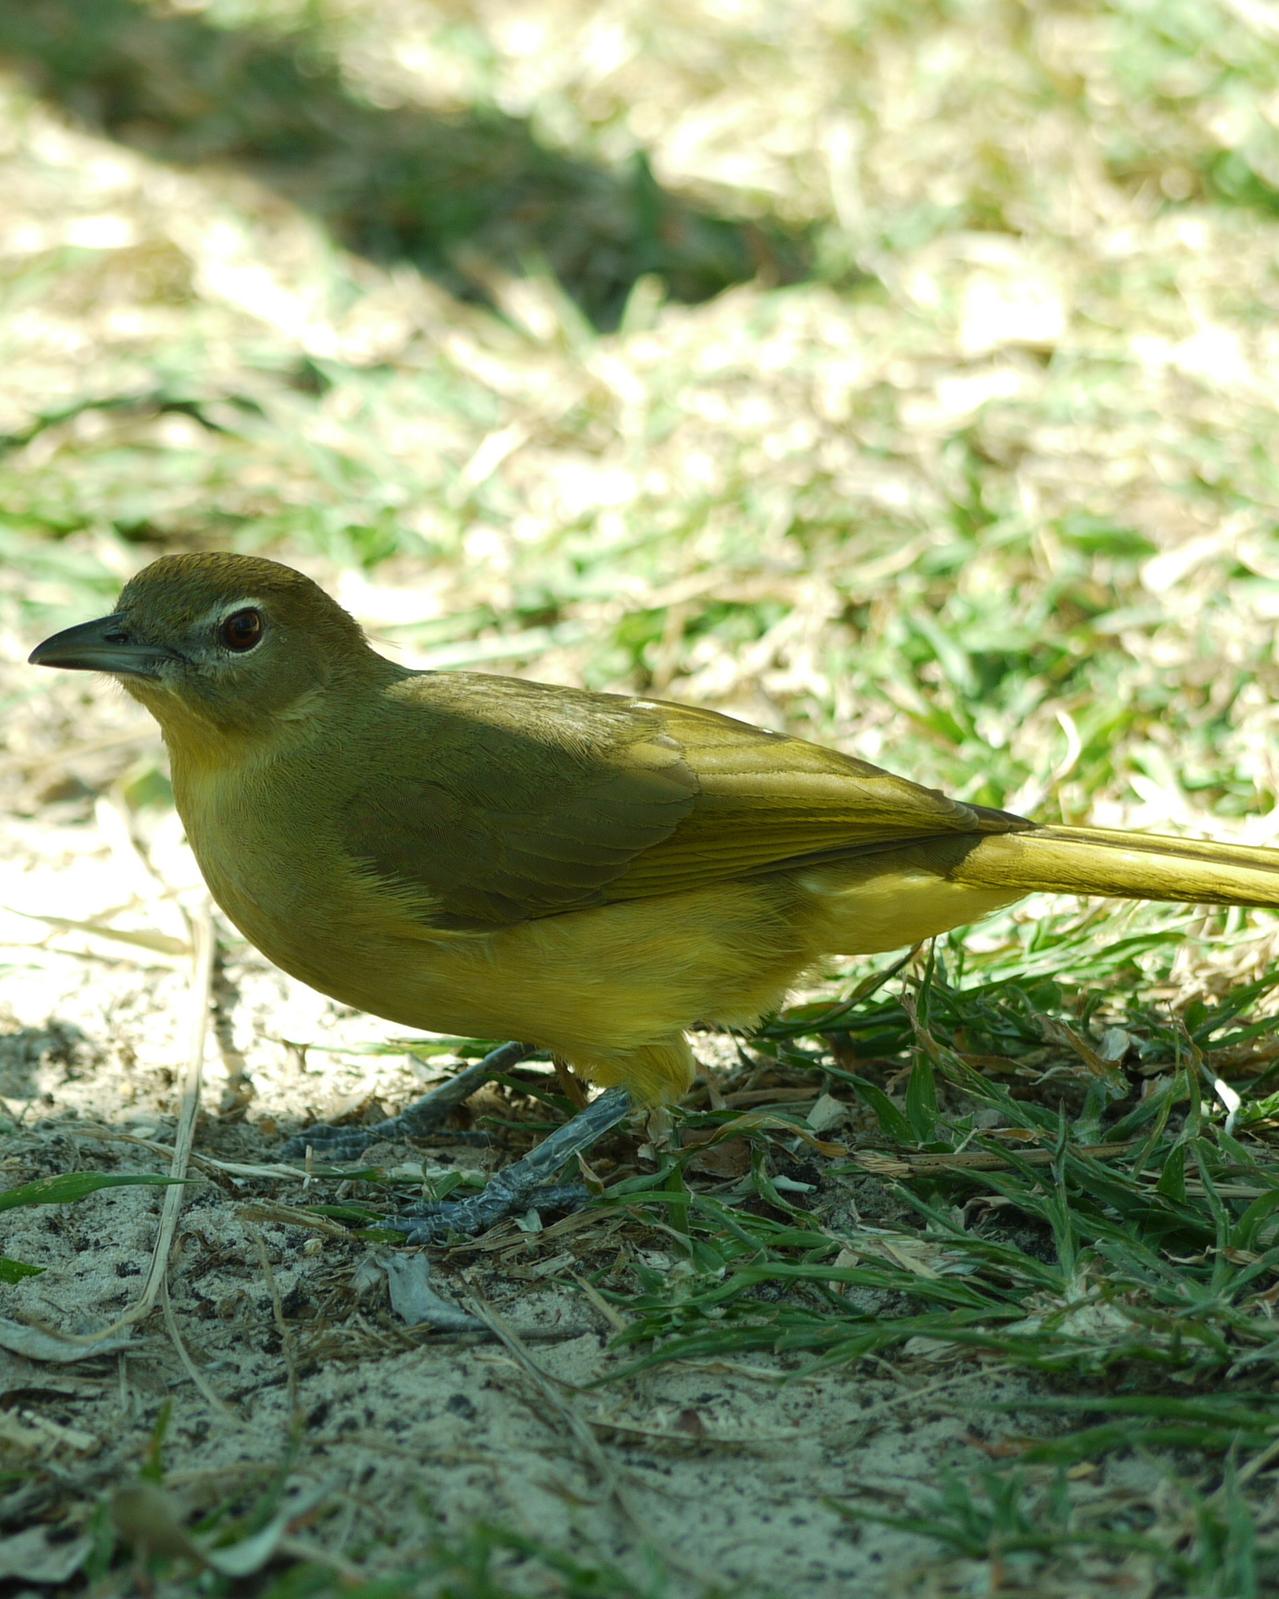 Yellow-bellied Greenbul Photo by Peter Lowe